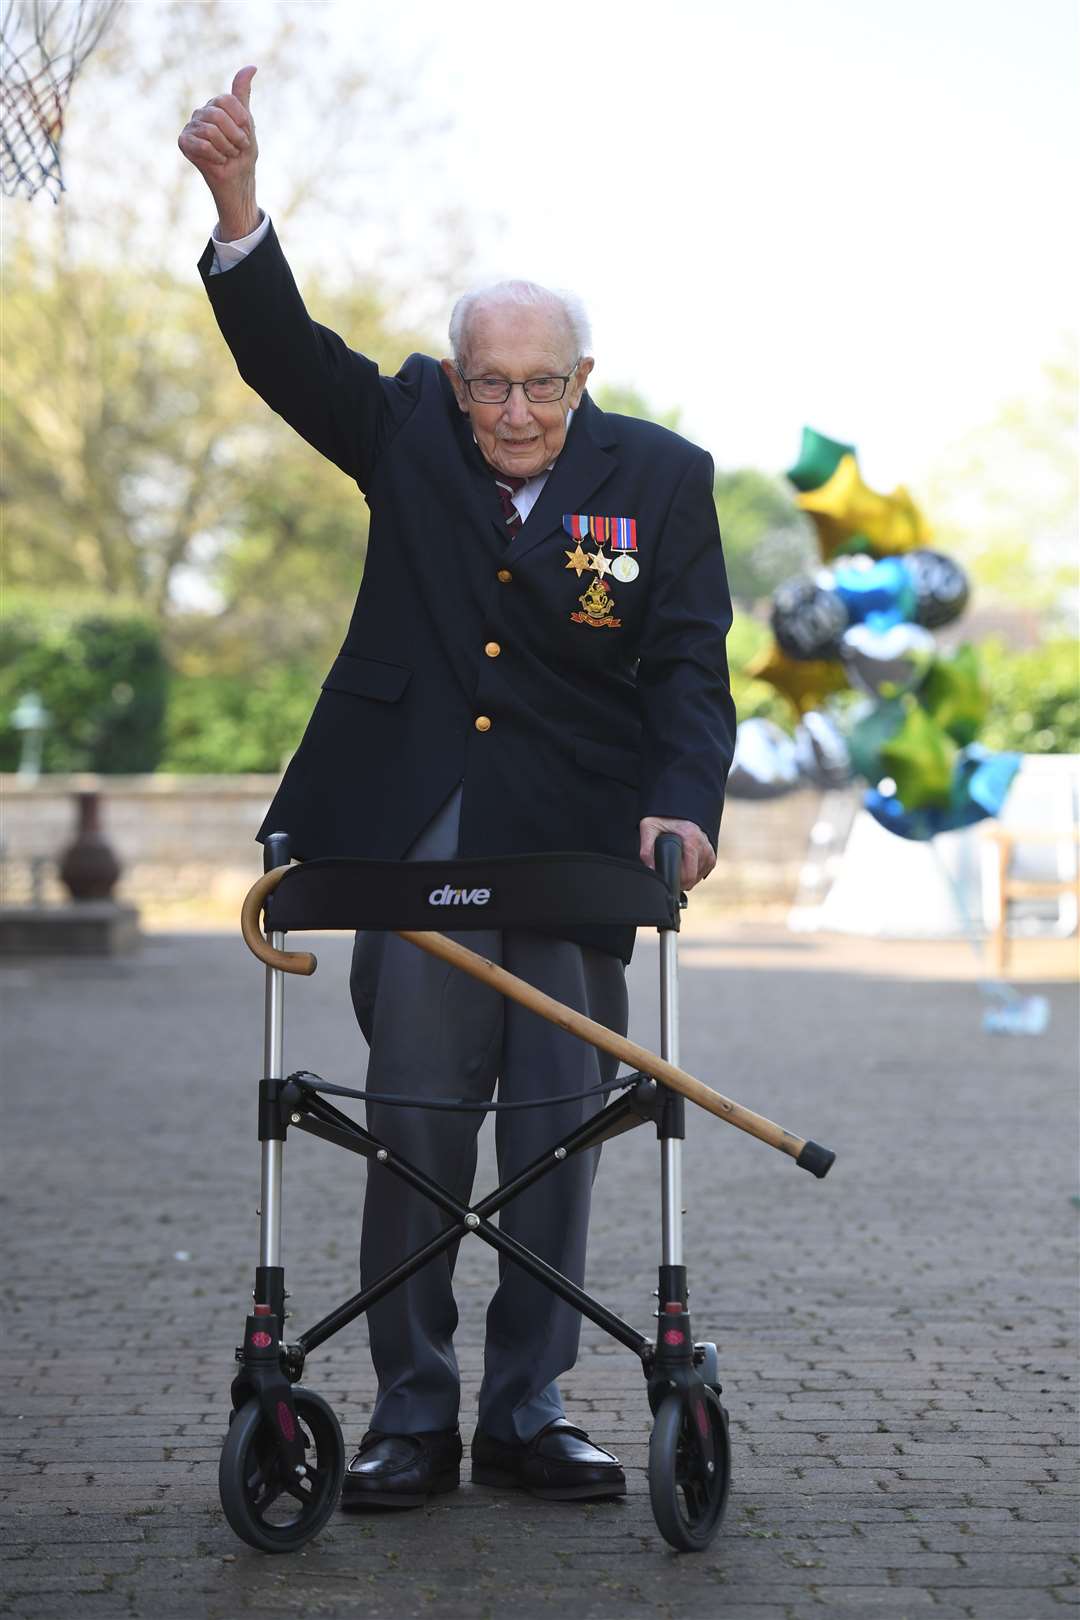 Captain Sir Tom Moore, then 99, at his home in Marston Moretaine, Bedfordshire, as he achieved his goal of 100 laps of his garden before his 100th birthday. He became a national hero after raising more than £32 million for NHS charities (Joe Giddens/PA)